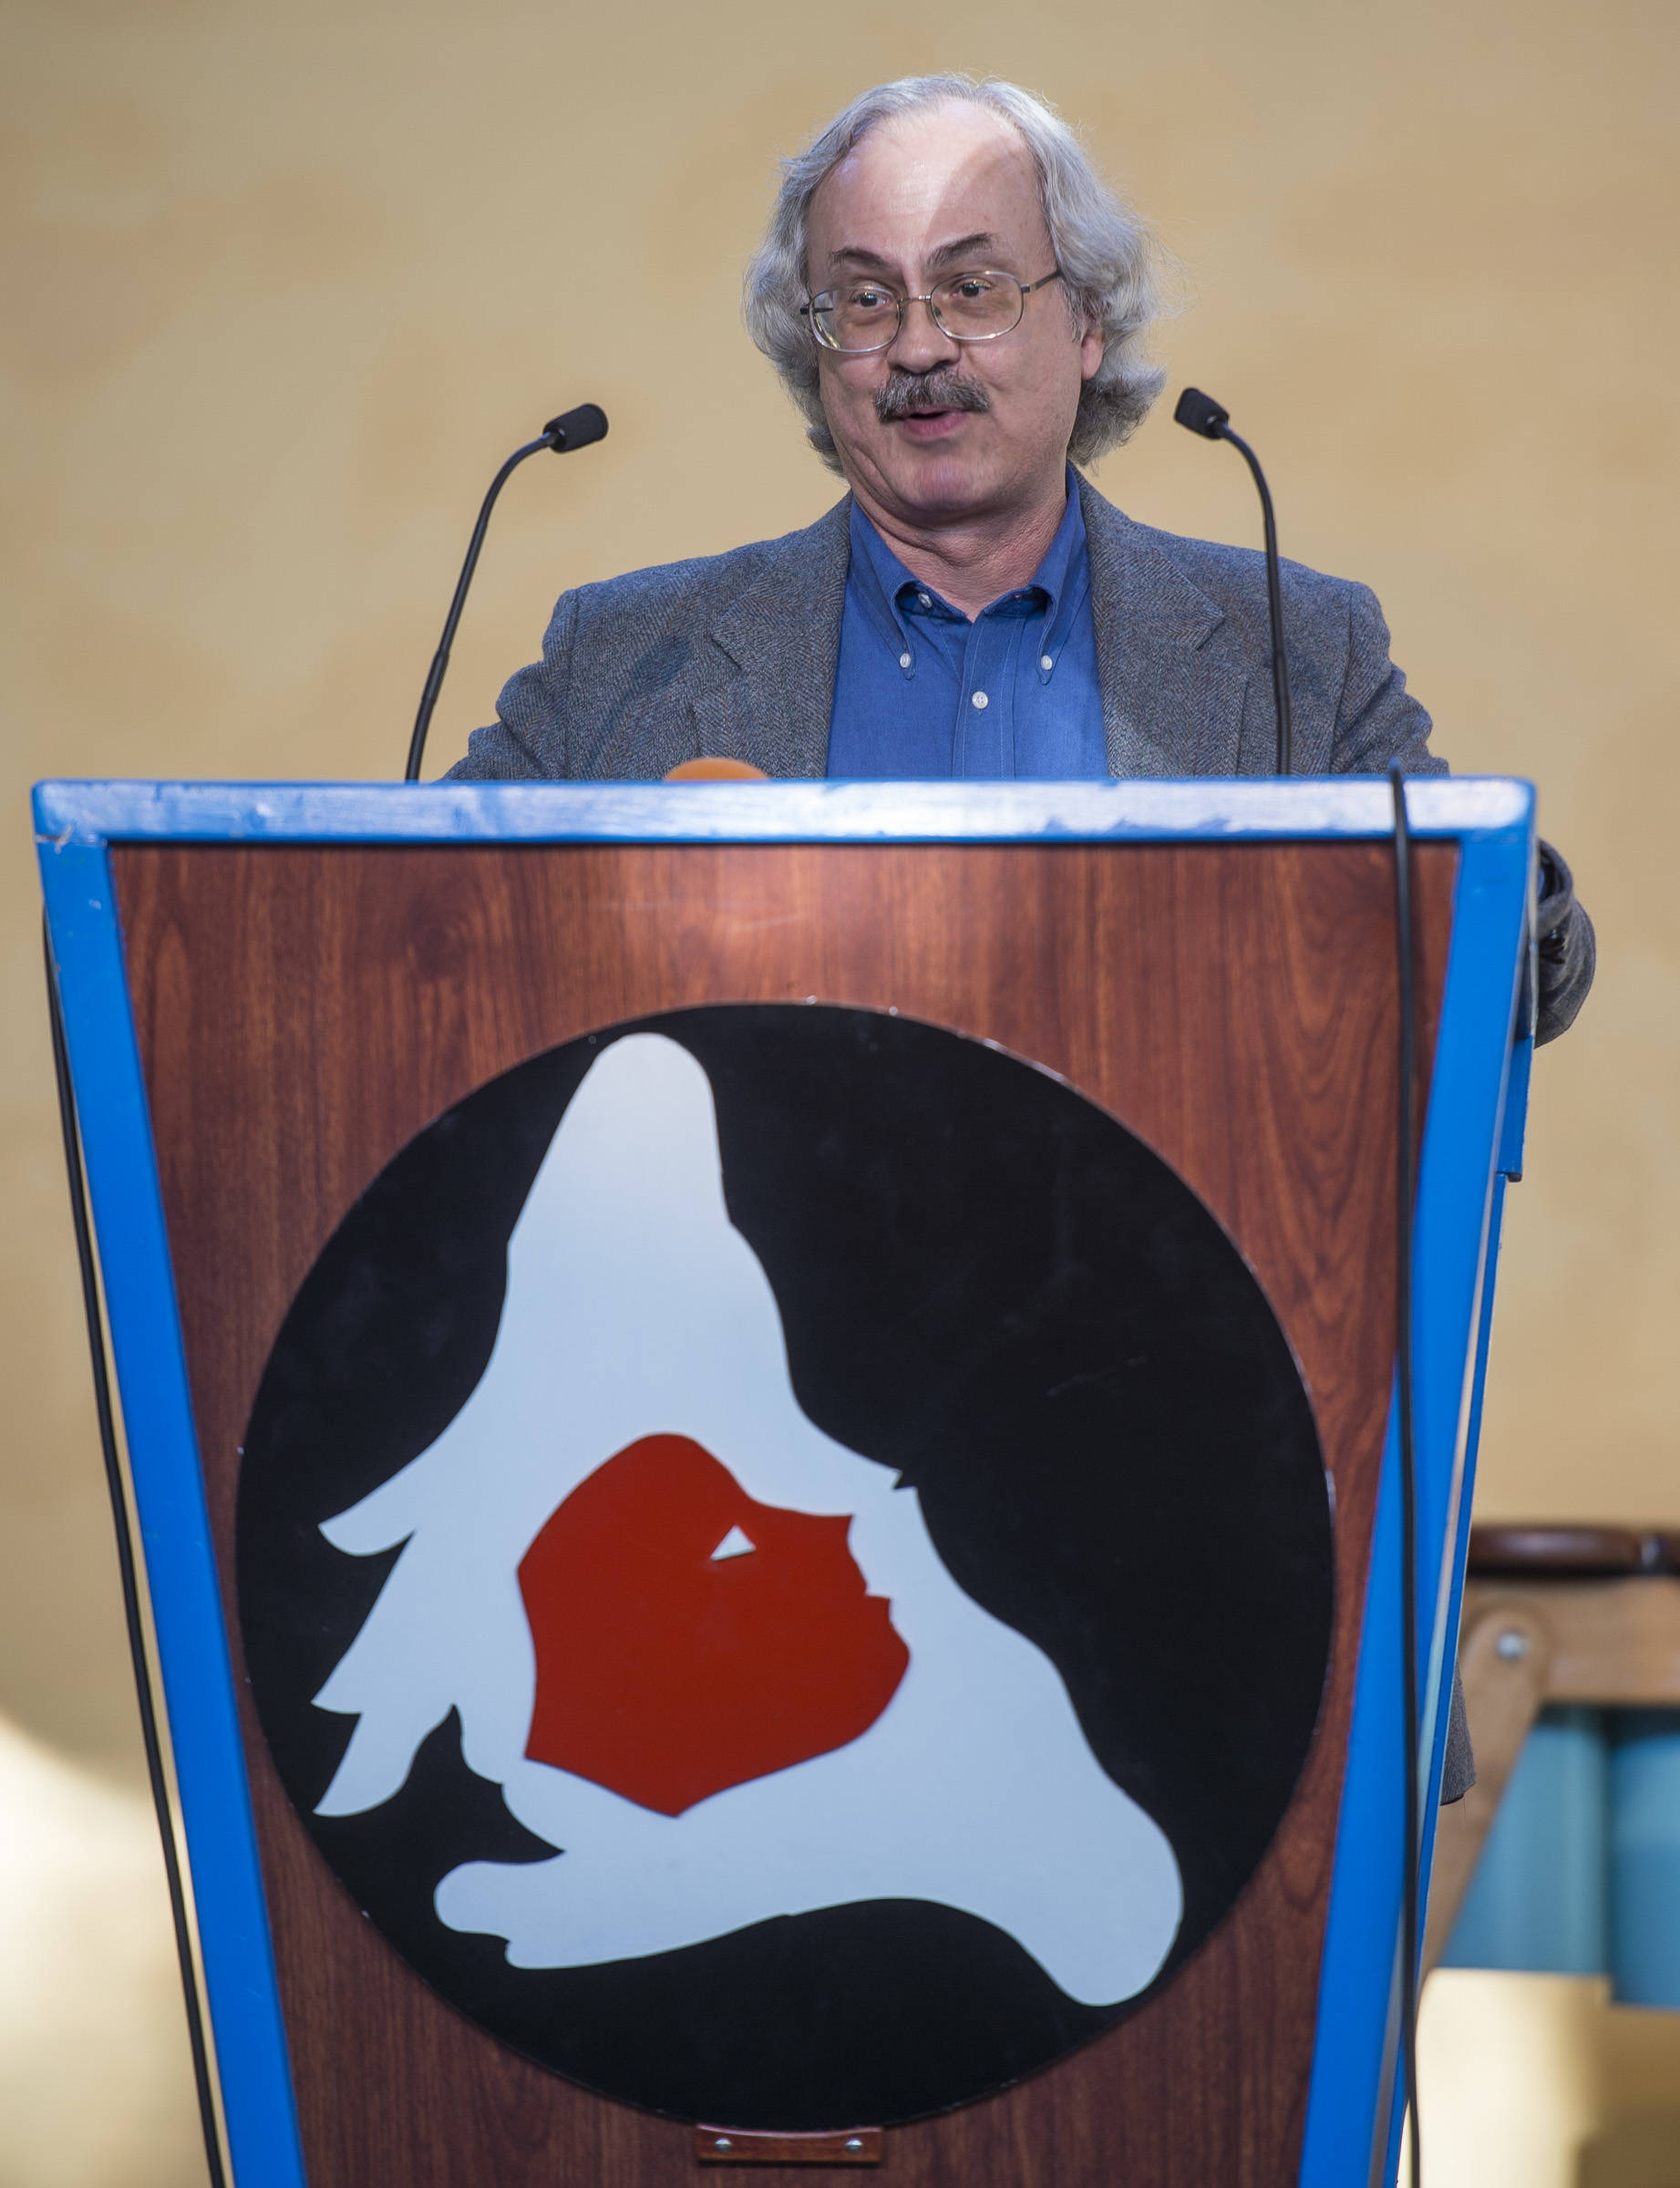 Tom Melville, of Capital Copy, speaks after receiving the Business Leadership for the Arts Award during the Mayor’s Awards for the Arts at the Juneau Arts & Culture Center on Friday, August 17, 2018. (Michael Penn | Juneau Empire)